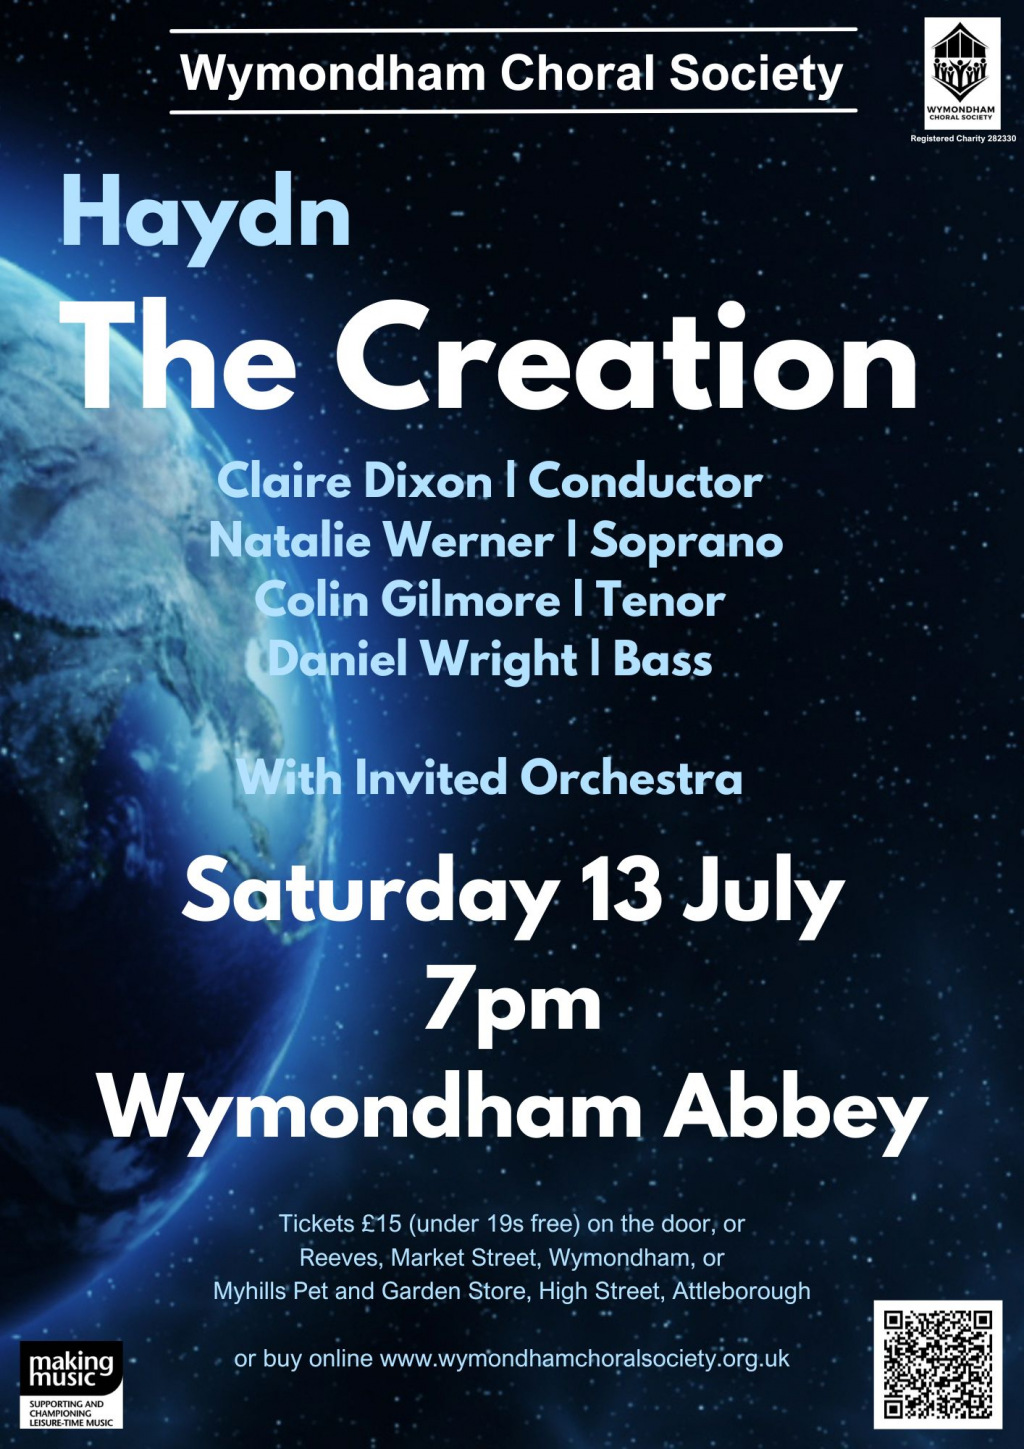 Choral Society The Creation event poster